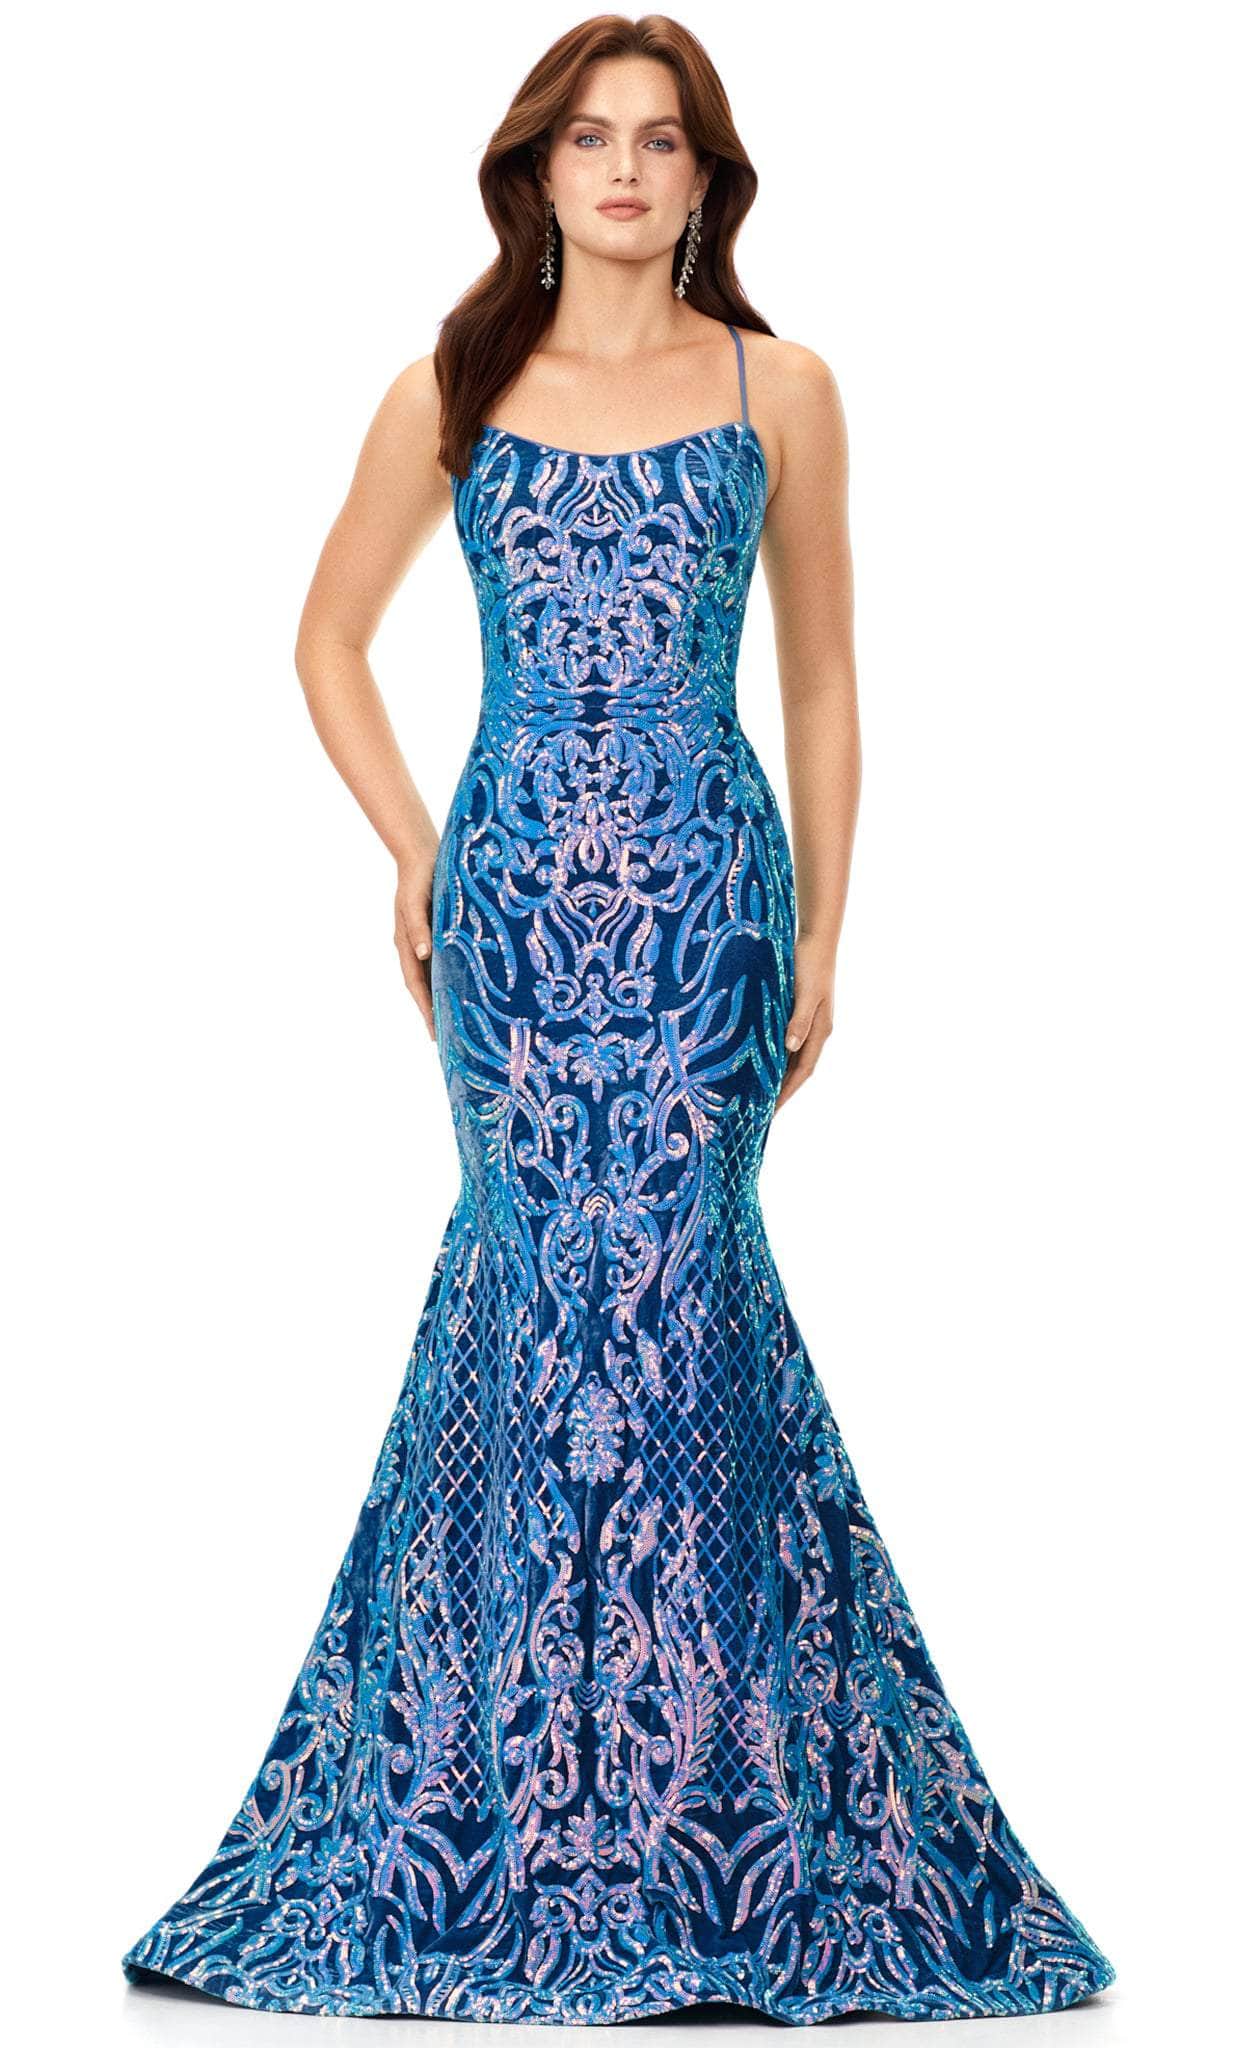 Image of Ashley Lauren 11331 - Fitted Strapless With Over Skirt Evening Gown